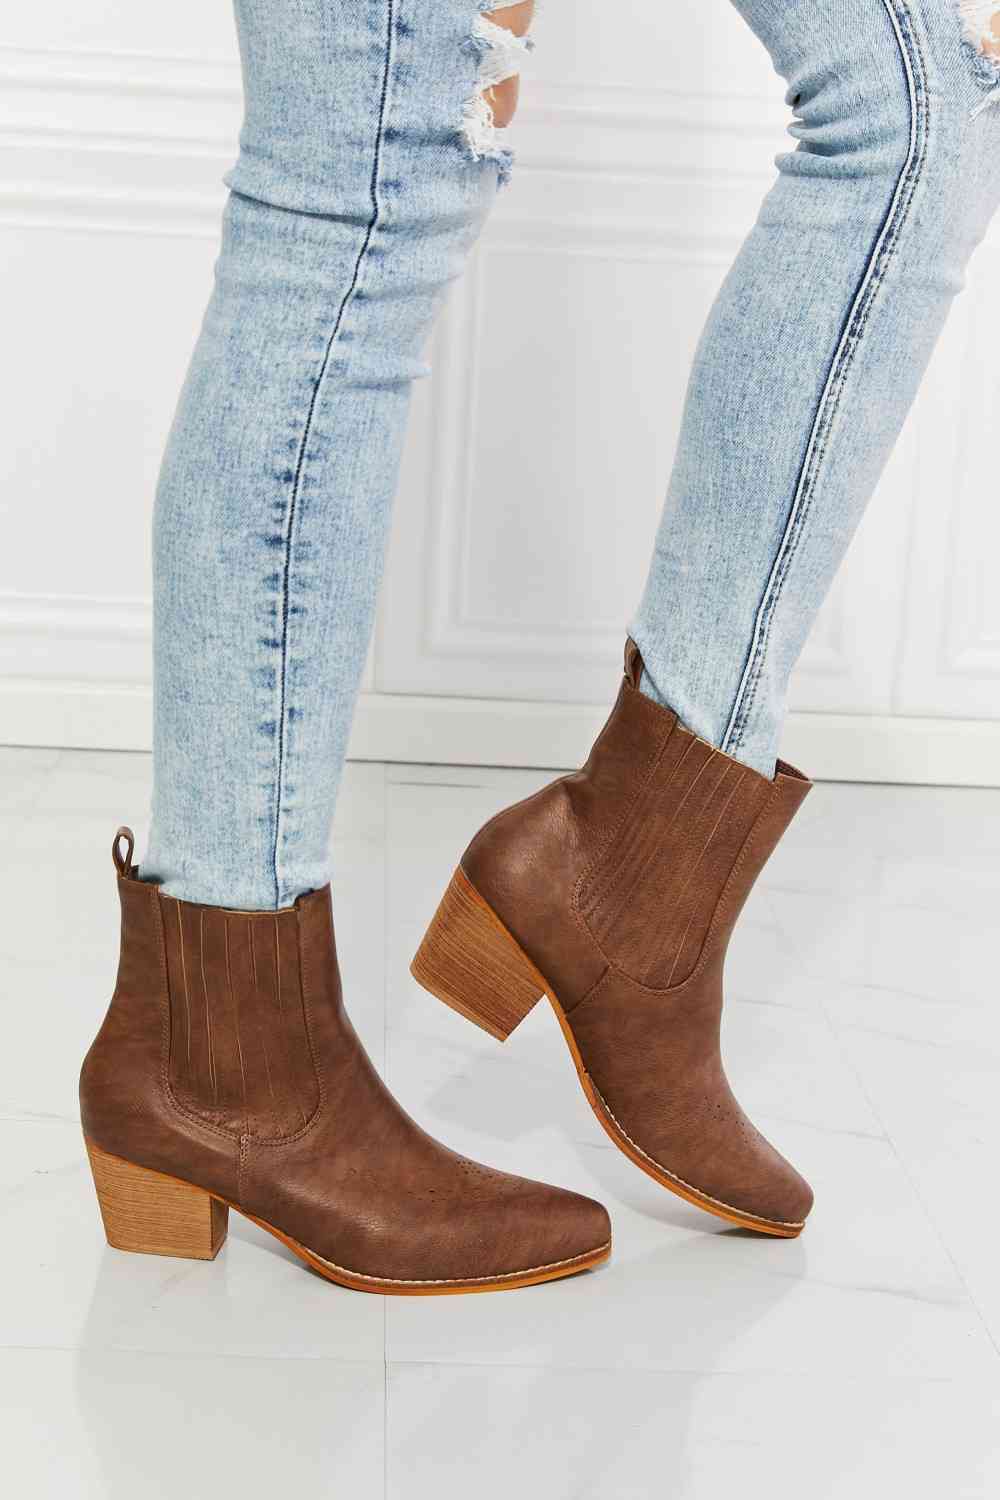 Love the Journey Stacked Heel Chelsea Boot in Chestnut - Accessories - Shoes - 2 - 2024